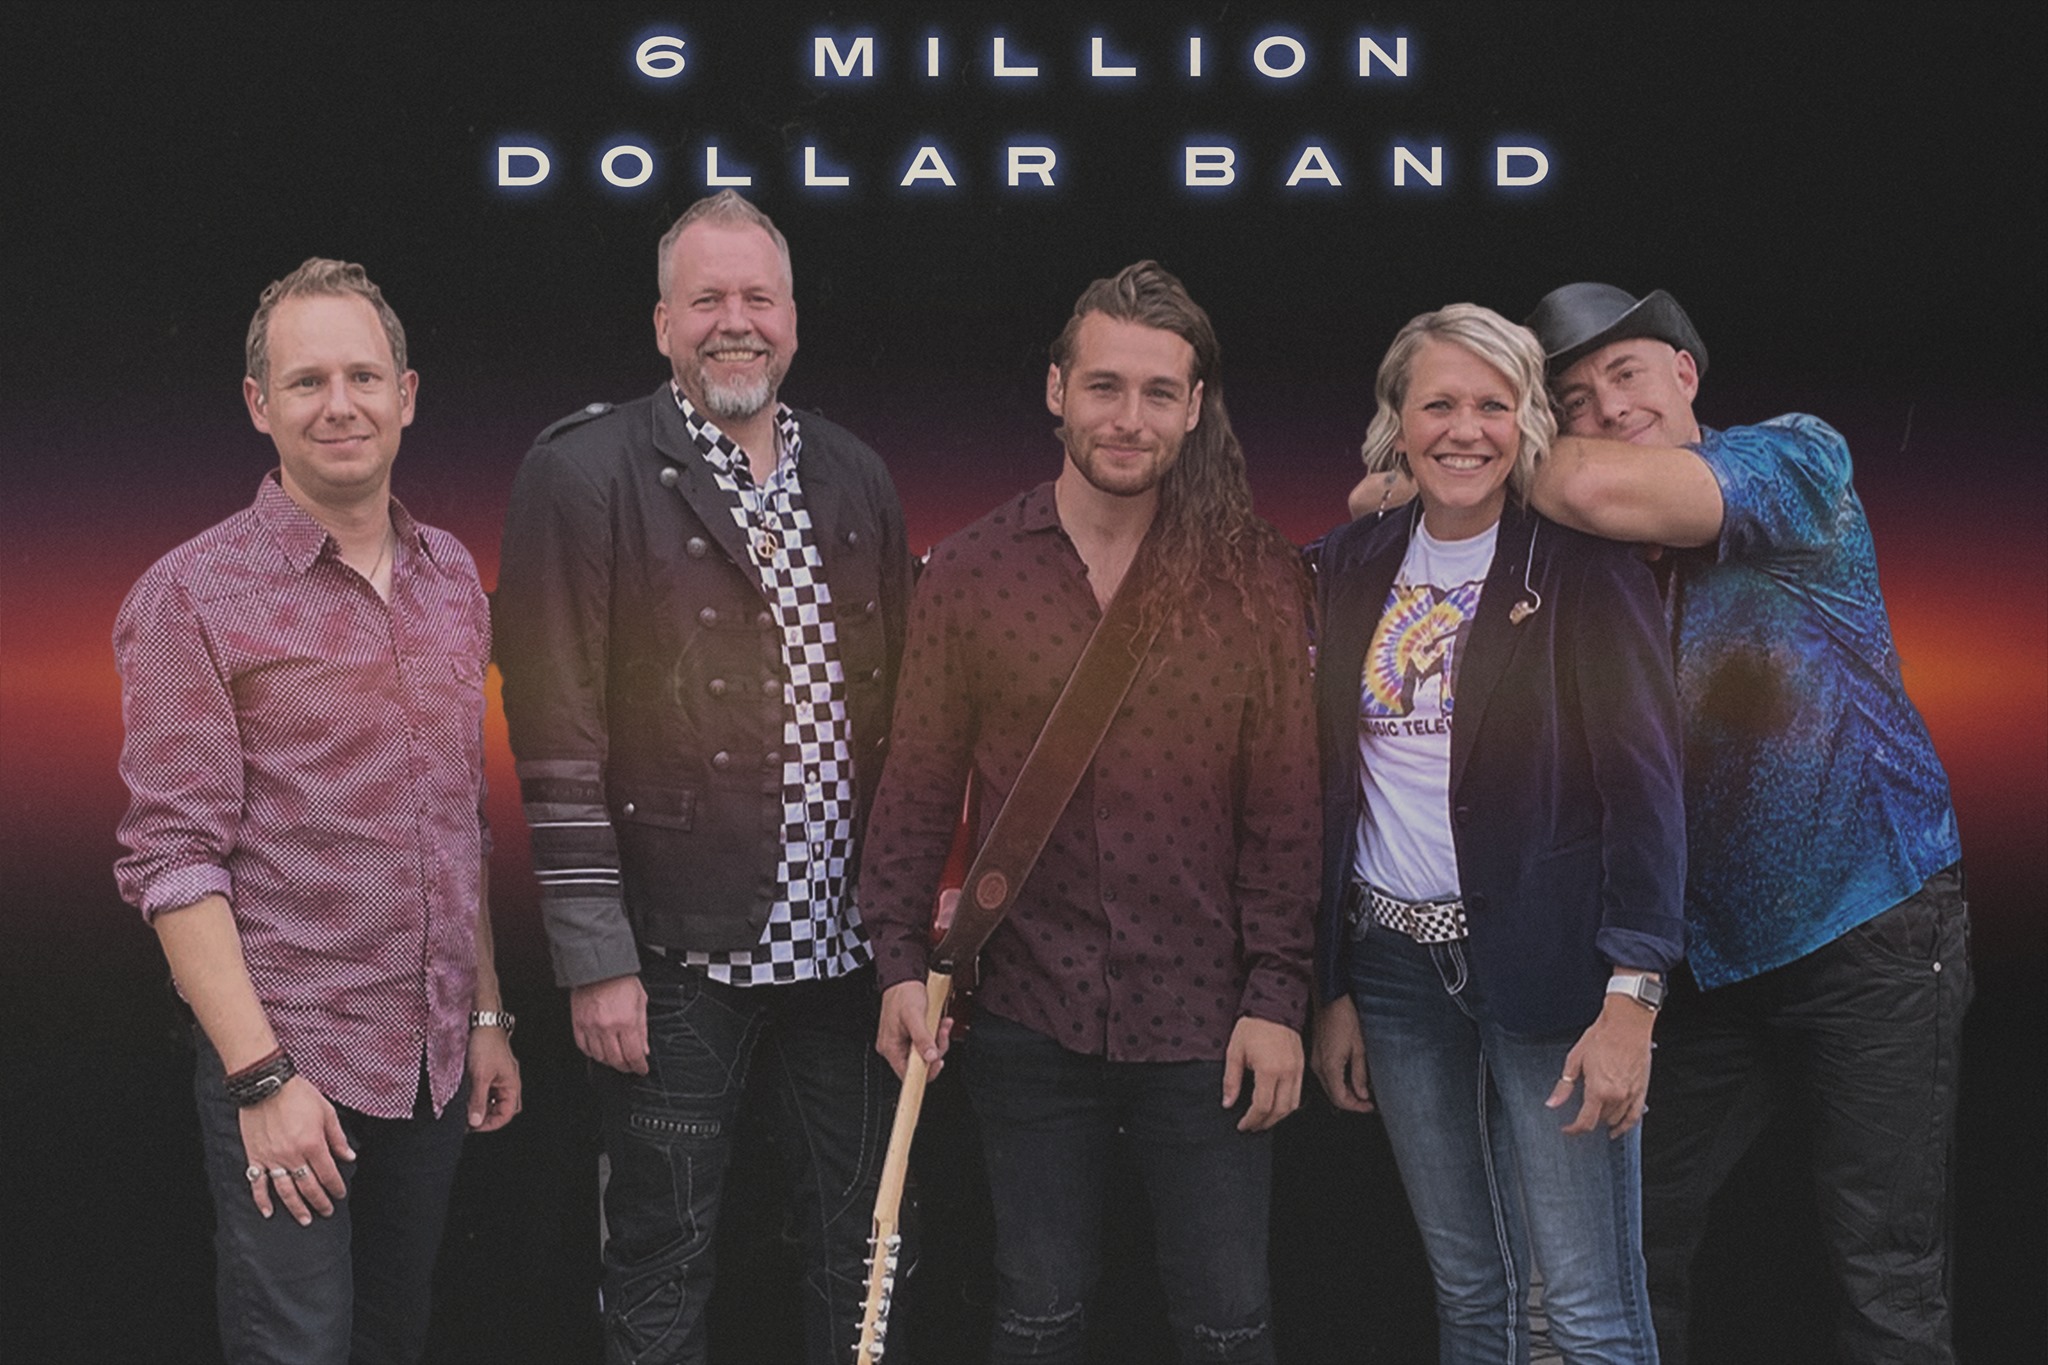 Buy Tickets to MILLION DOLLAR BAND (ALL OUT 80'S EXPERIENCE) in Parker